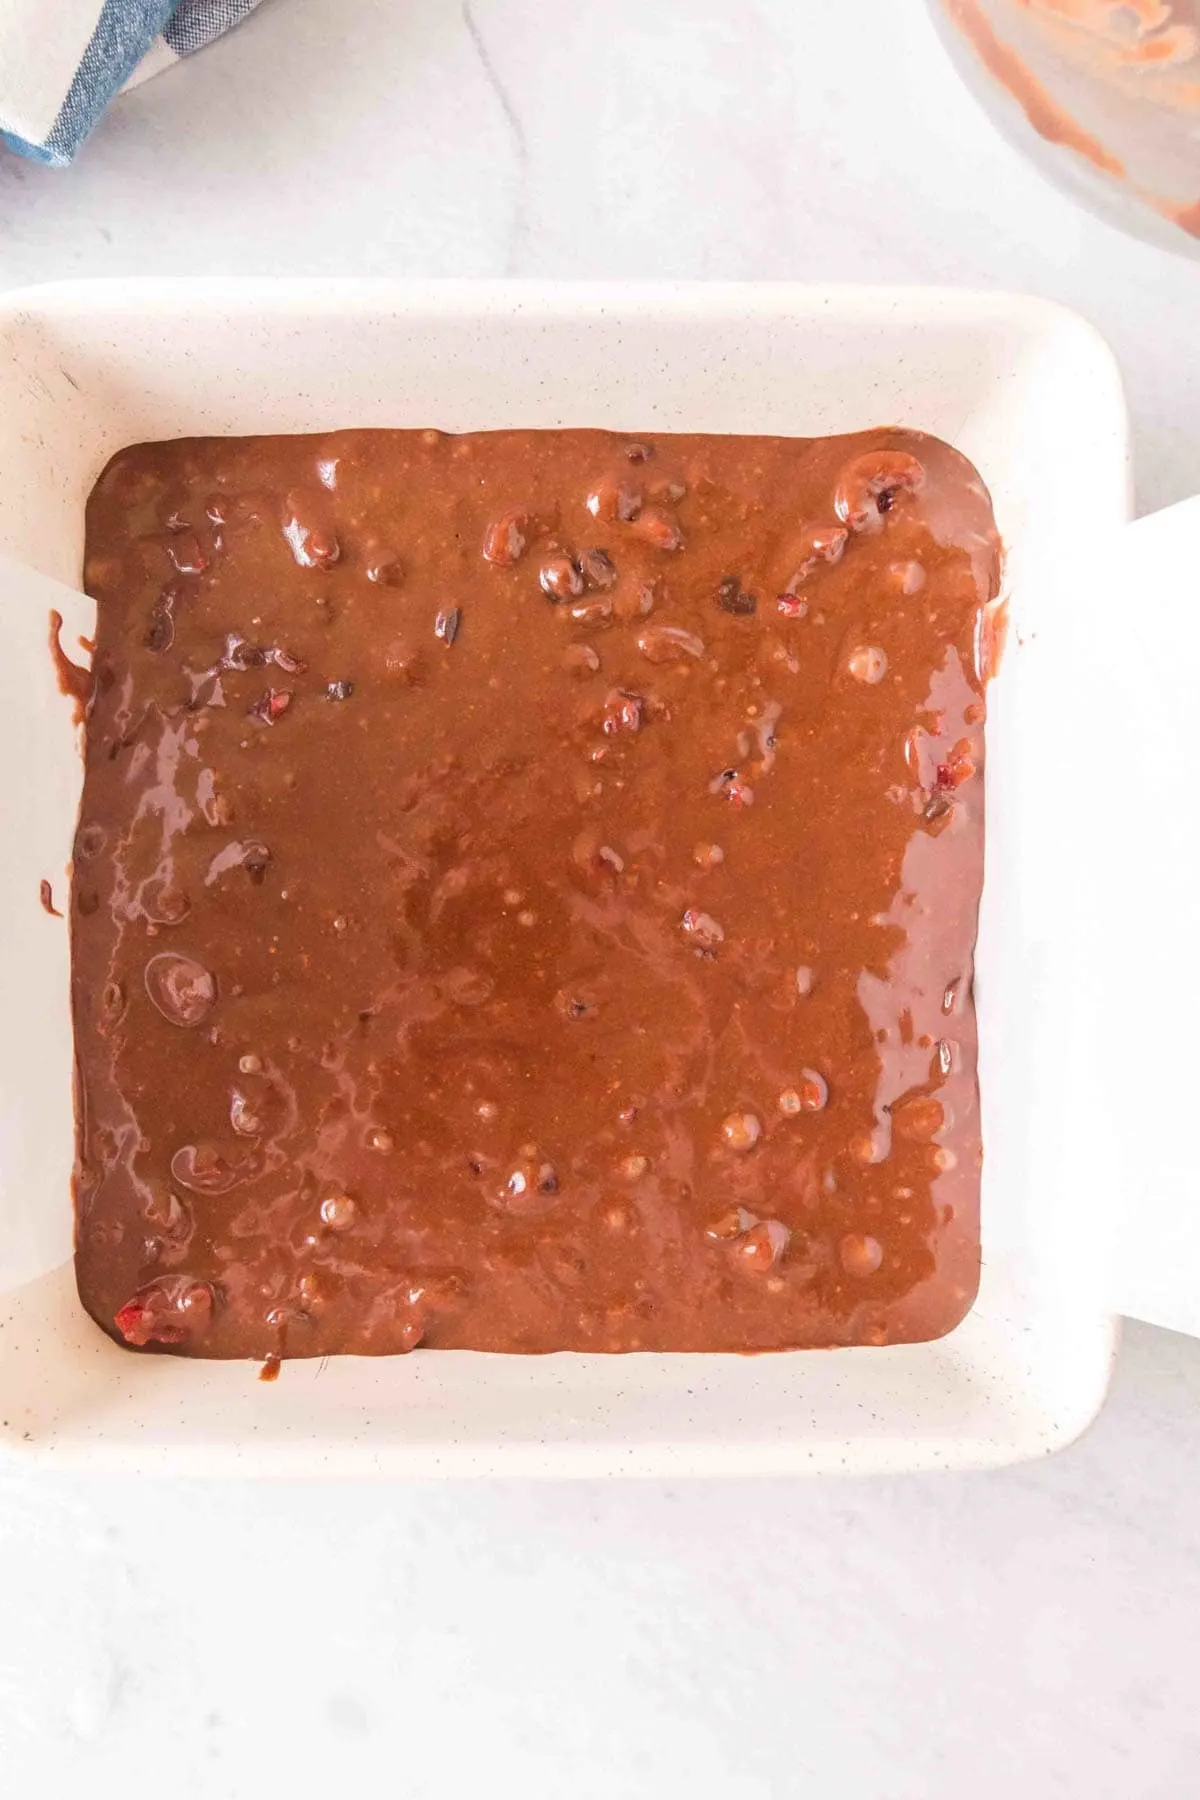 brownie batter in a parchment lined baking sheet